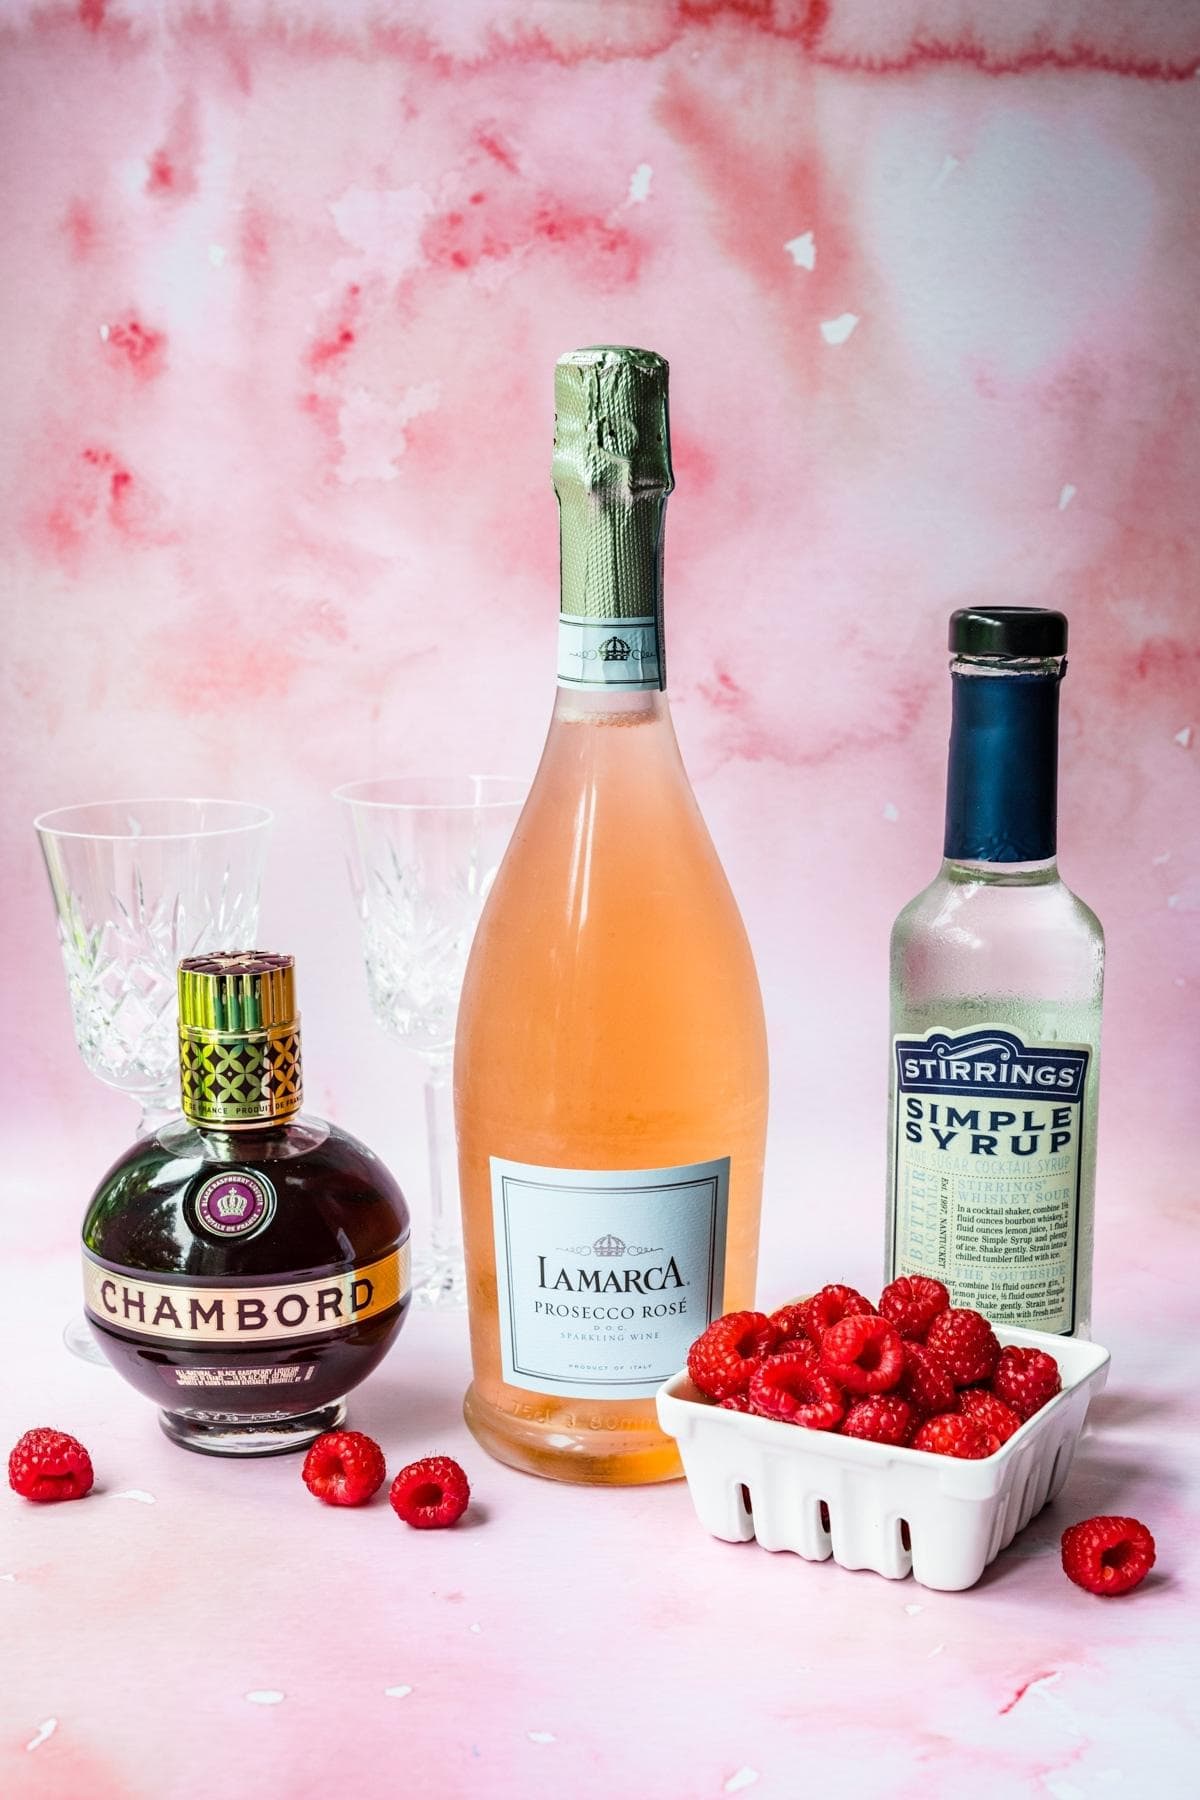 Front view of raspberries, chambord, prosecco rose, and simple syrup on a pink background.